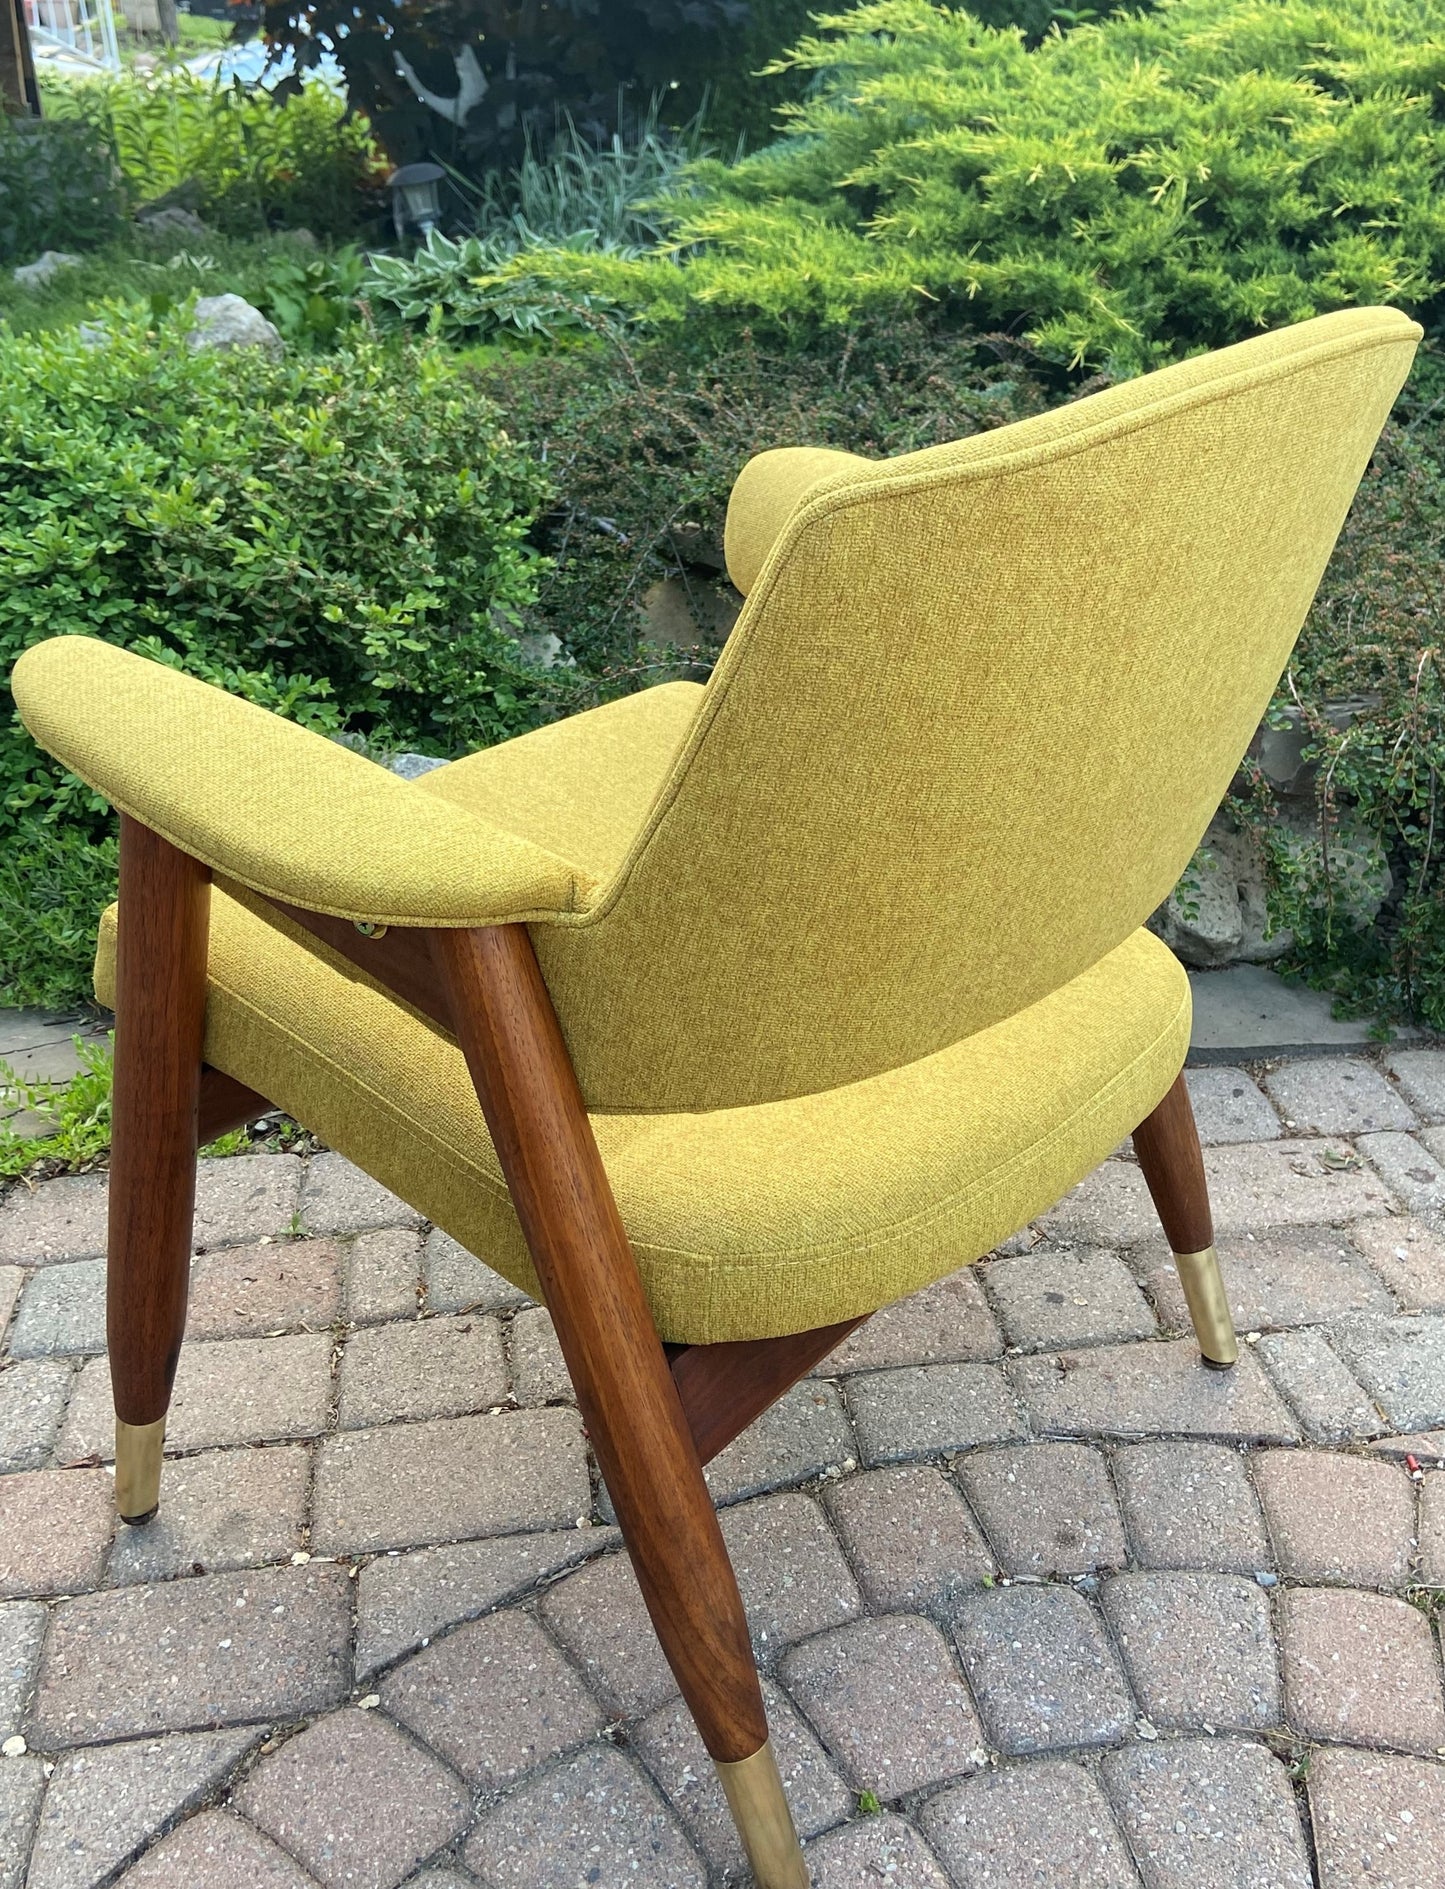 REFINISHED REUPHOLSTERED Mid Century Modern walnut armchair, Perfect